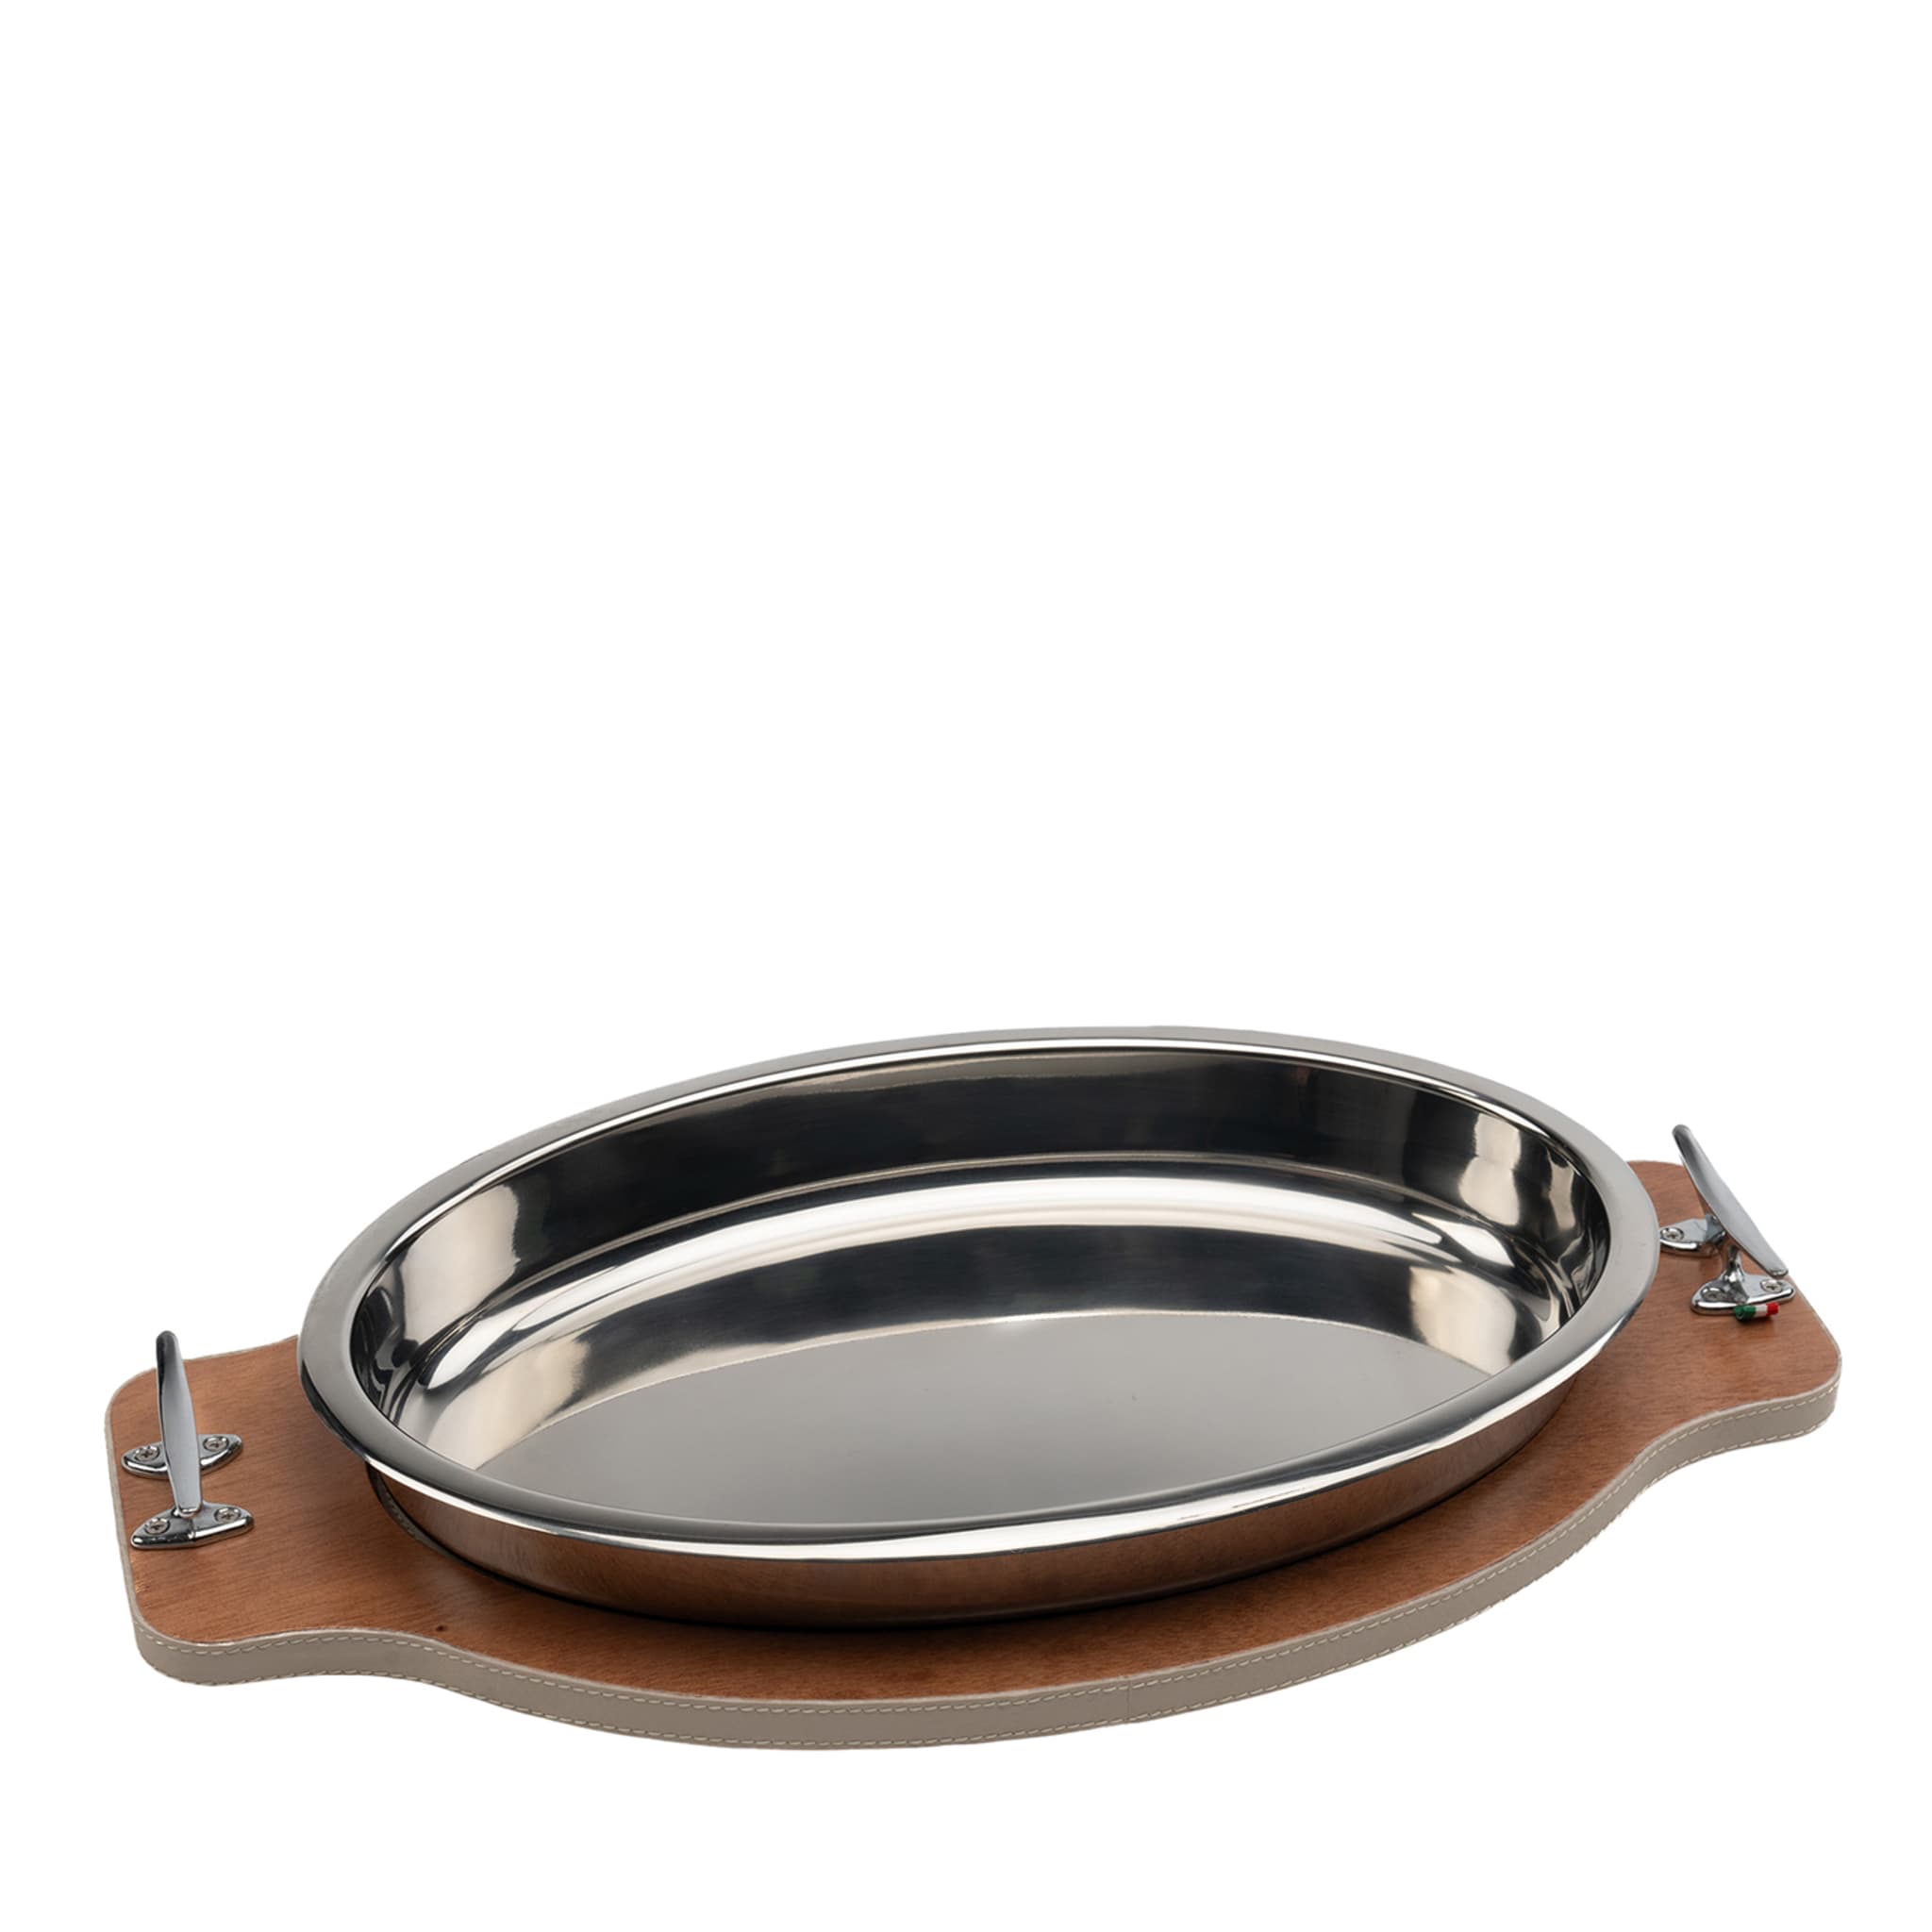 Nautical-Inspired Large Oval Serving Tray in Wood & Steel - Main view